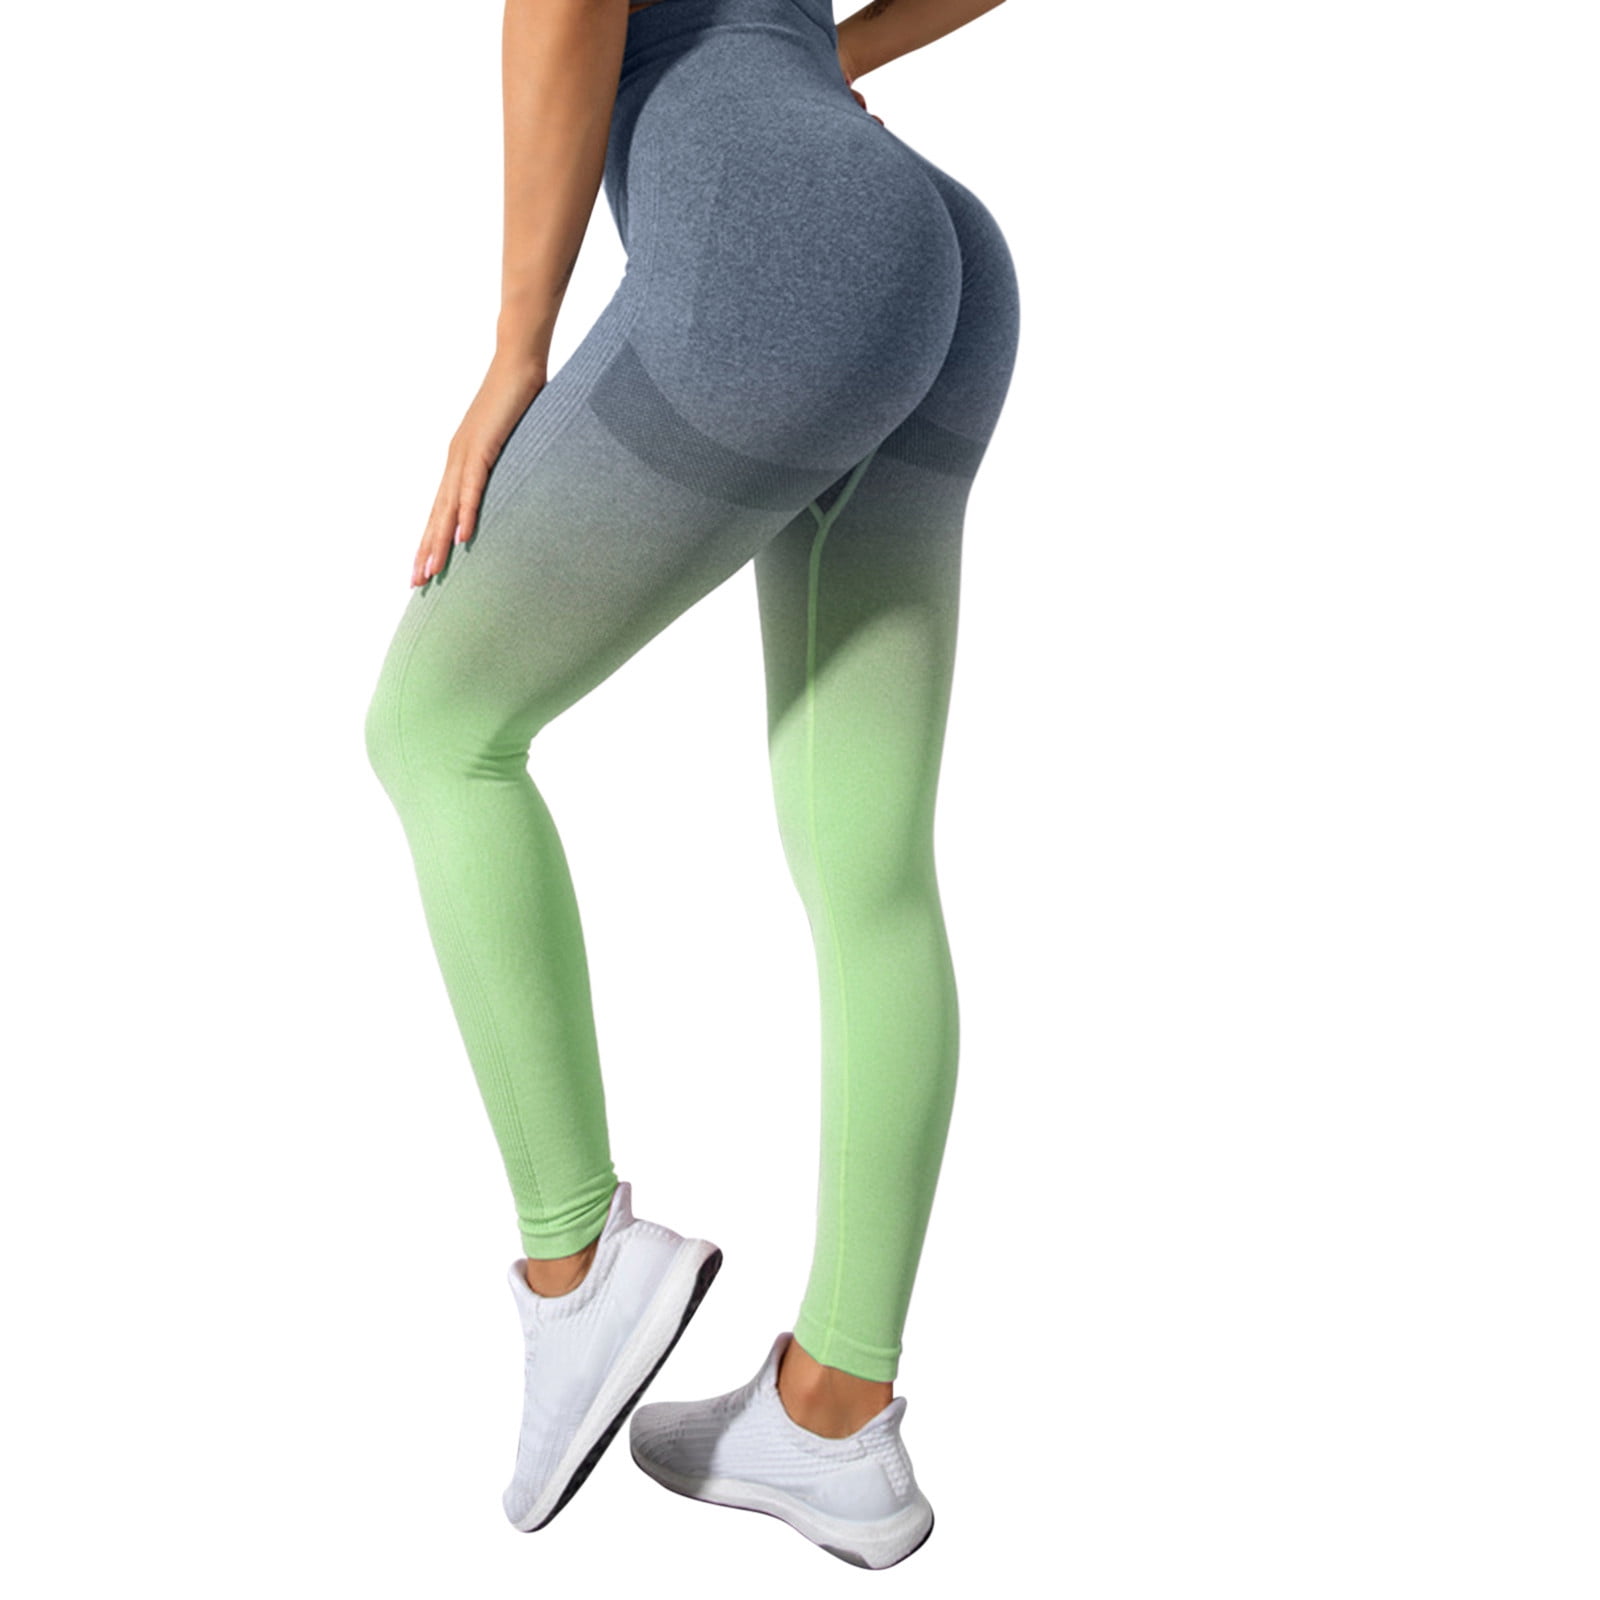 Yoga Pants for Women Plus Size Gibobby Casual Yoga Leggings High Waist Tummy Control Workout Gym Athletic Pants Trousers 